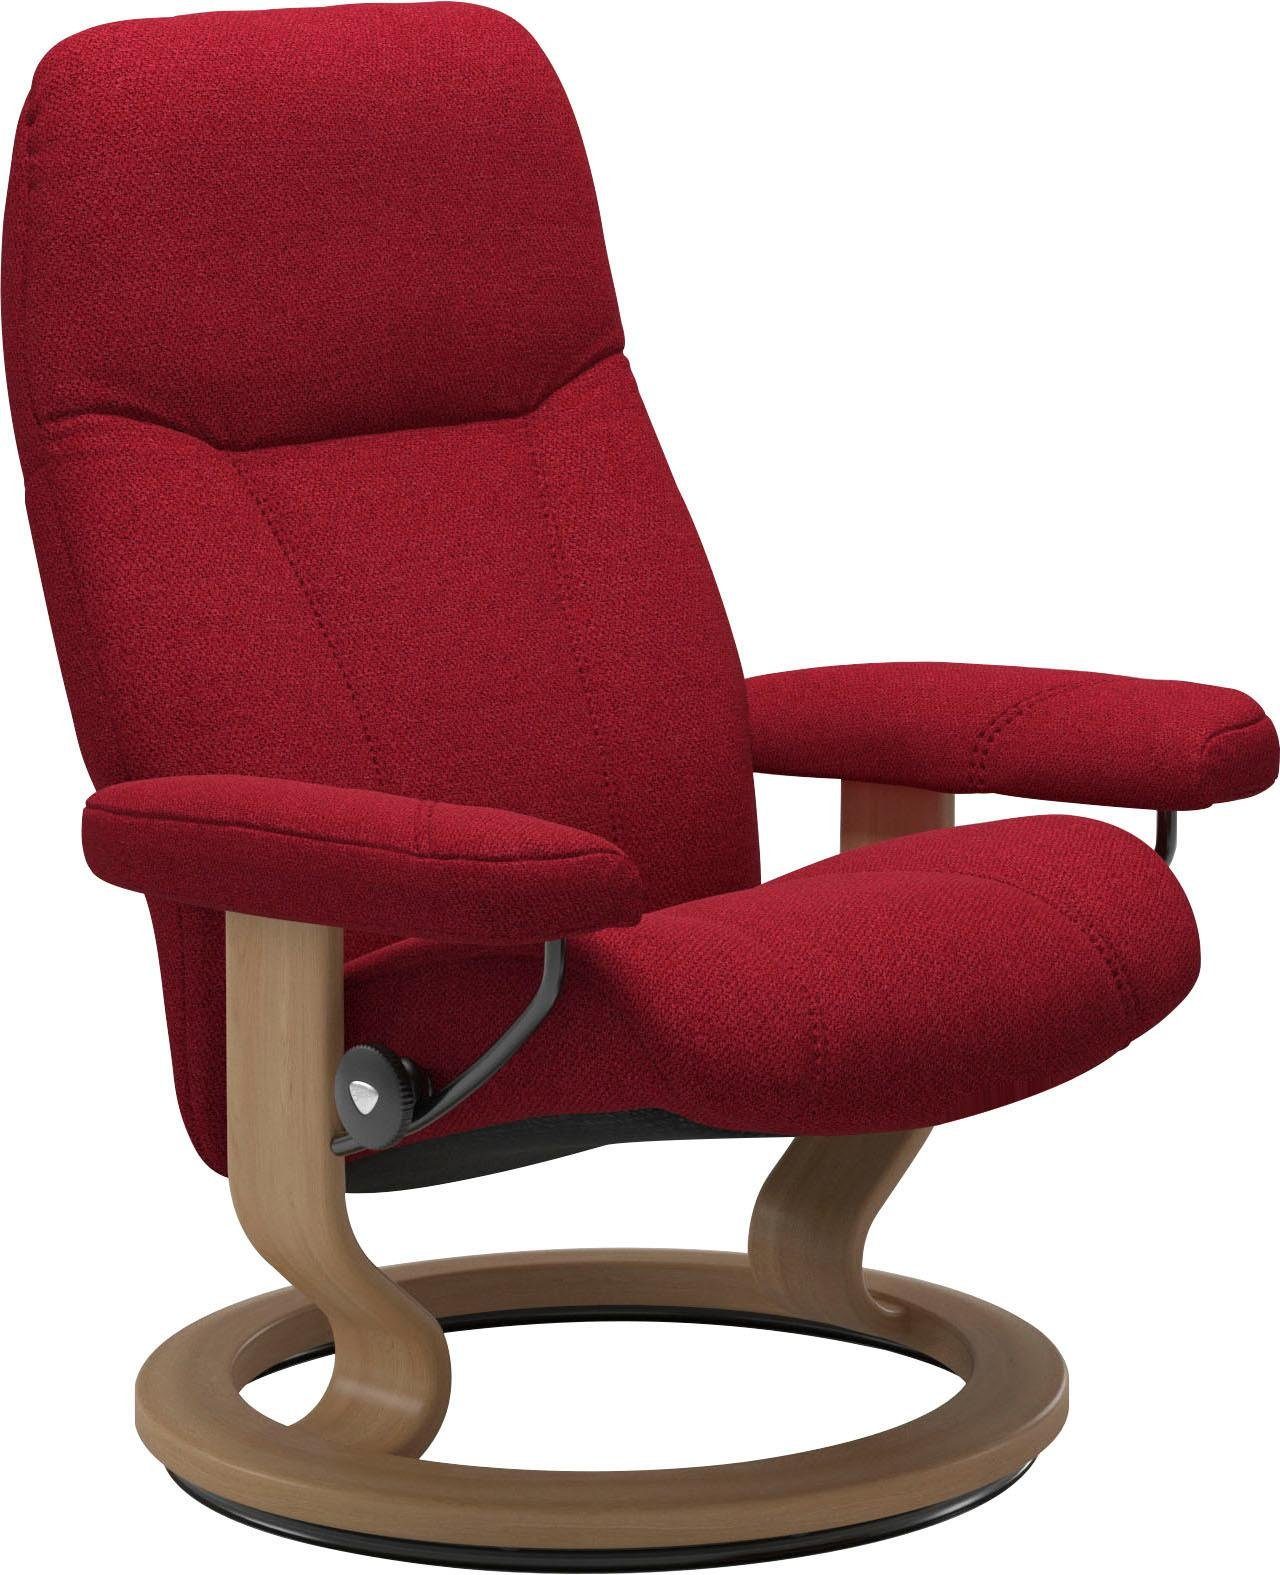 Stressless® Relaxsessel Consul, mit Classic Base, Größe M, Gestell Eiche | Funktionssessel